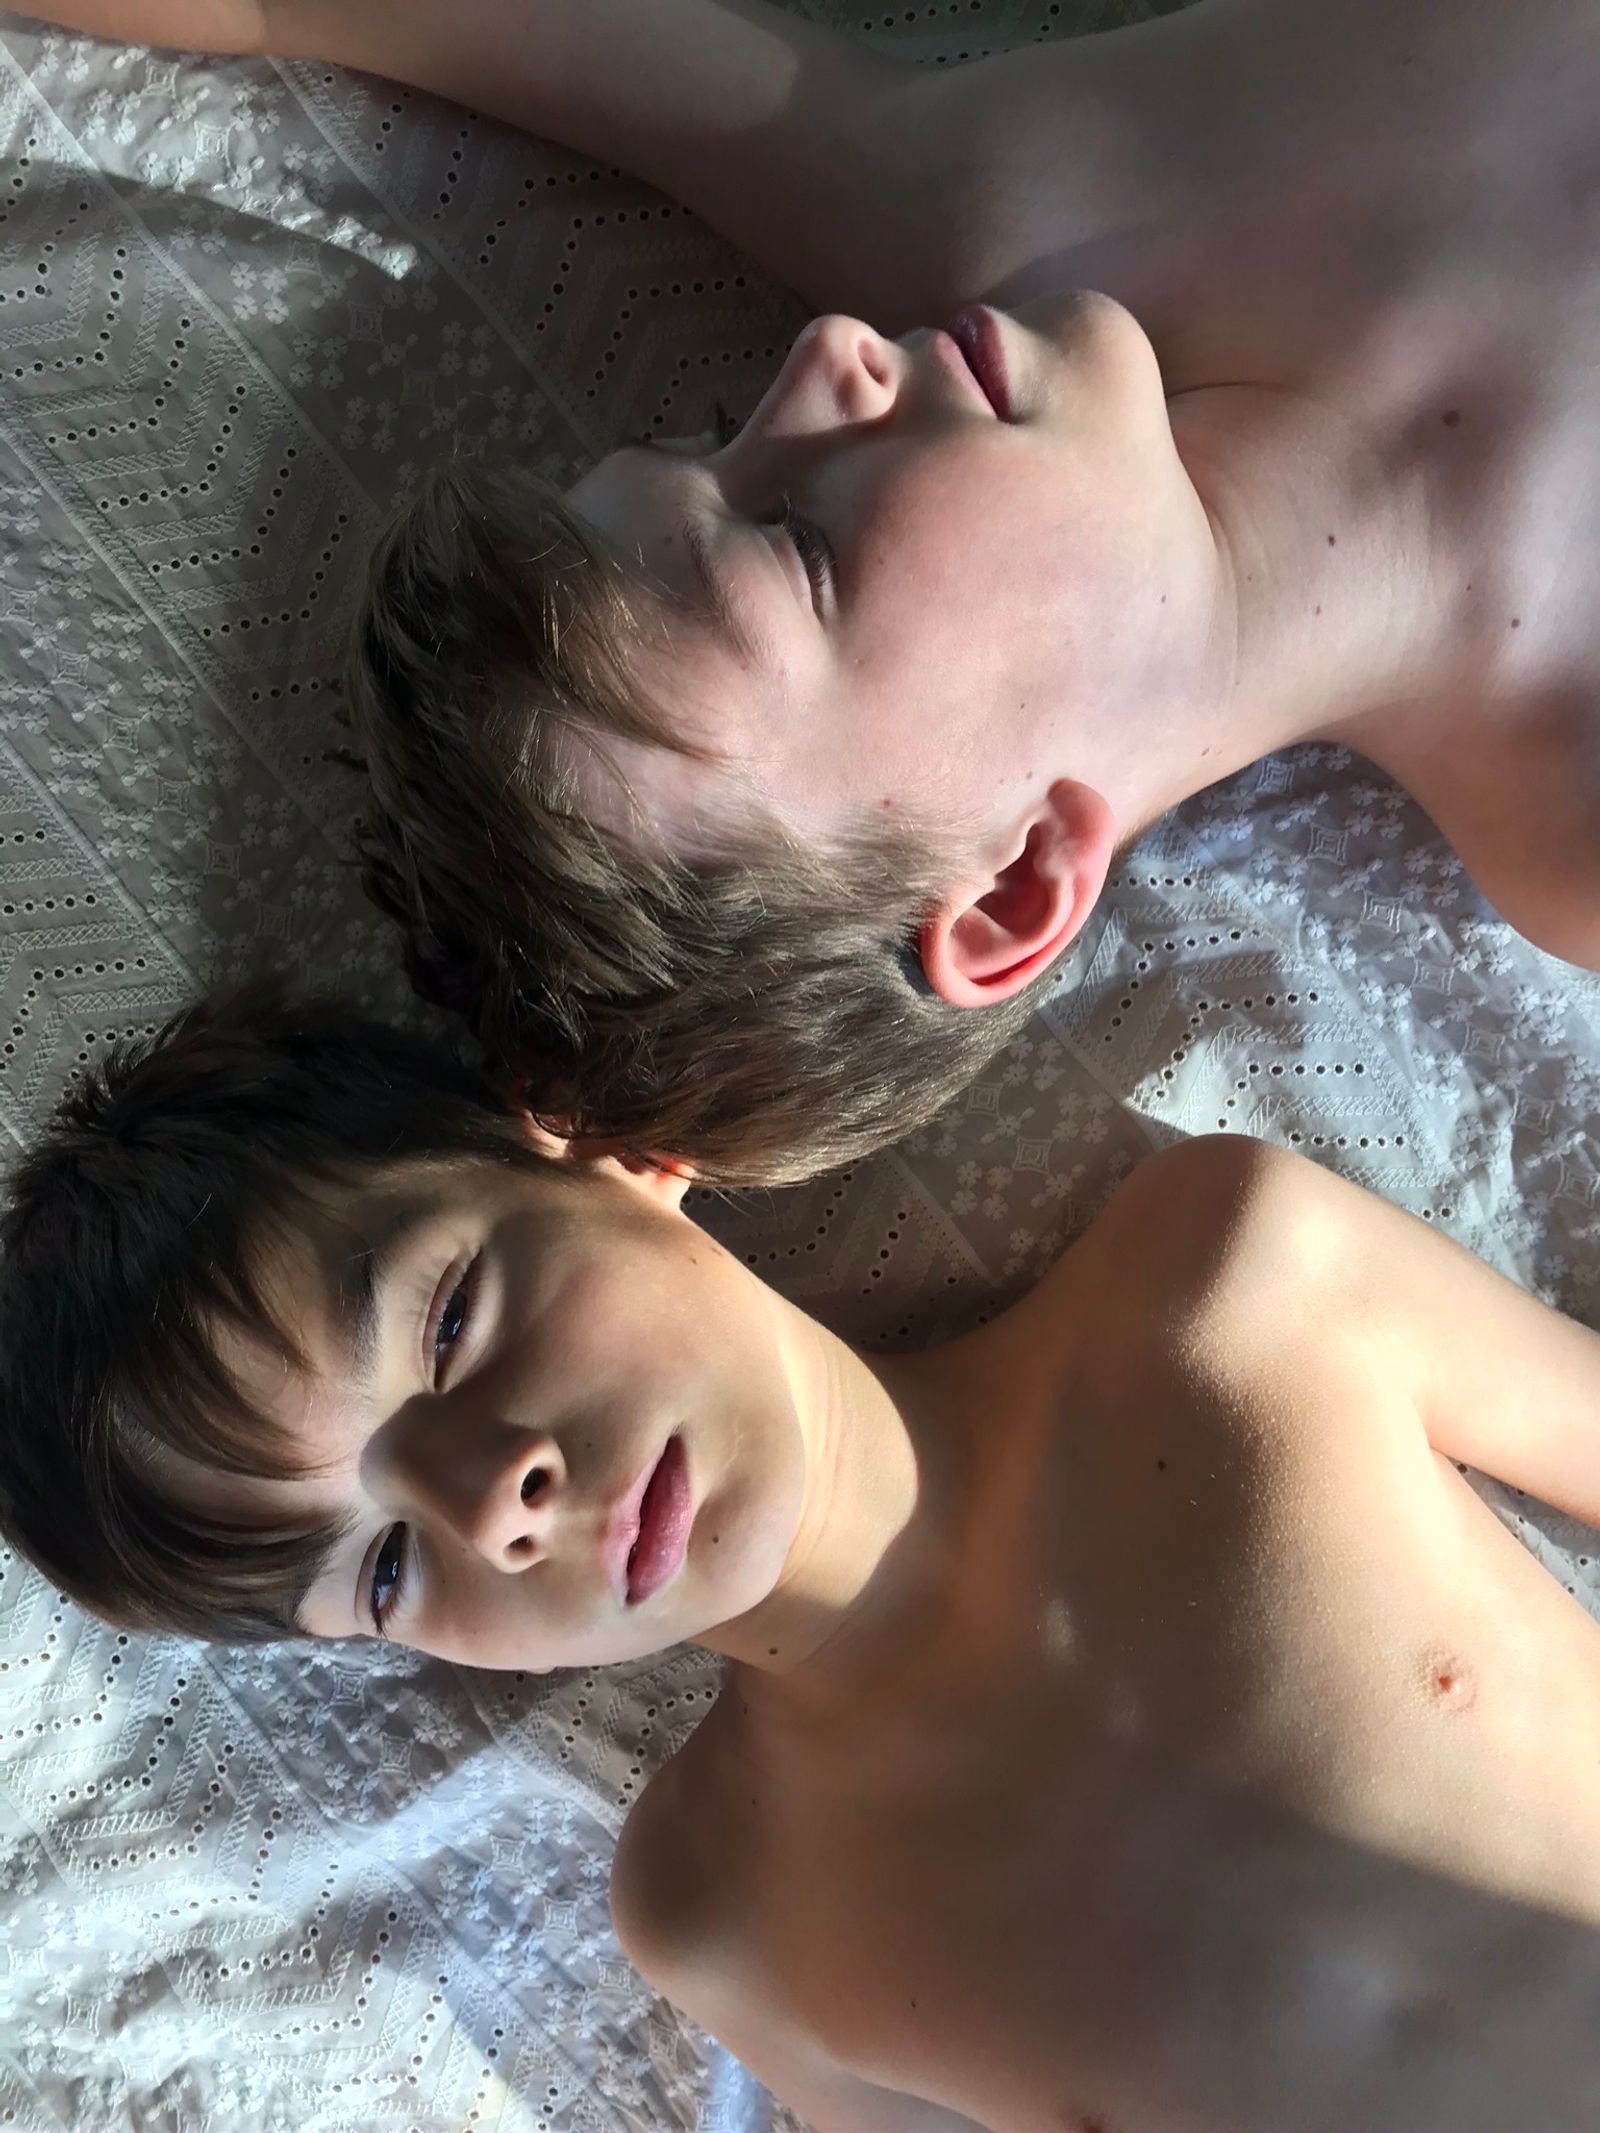 © Charlotte Coquillaud - Them. Lucas and William in the spotlight of my camera. Exploring them in a new light. Mexico City, November 2020.